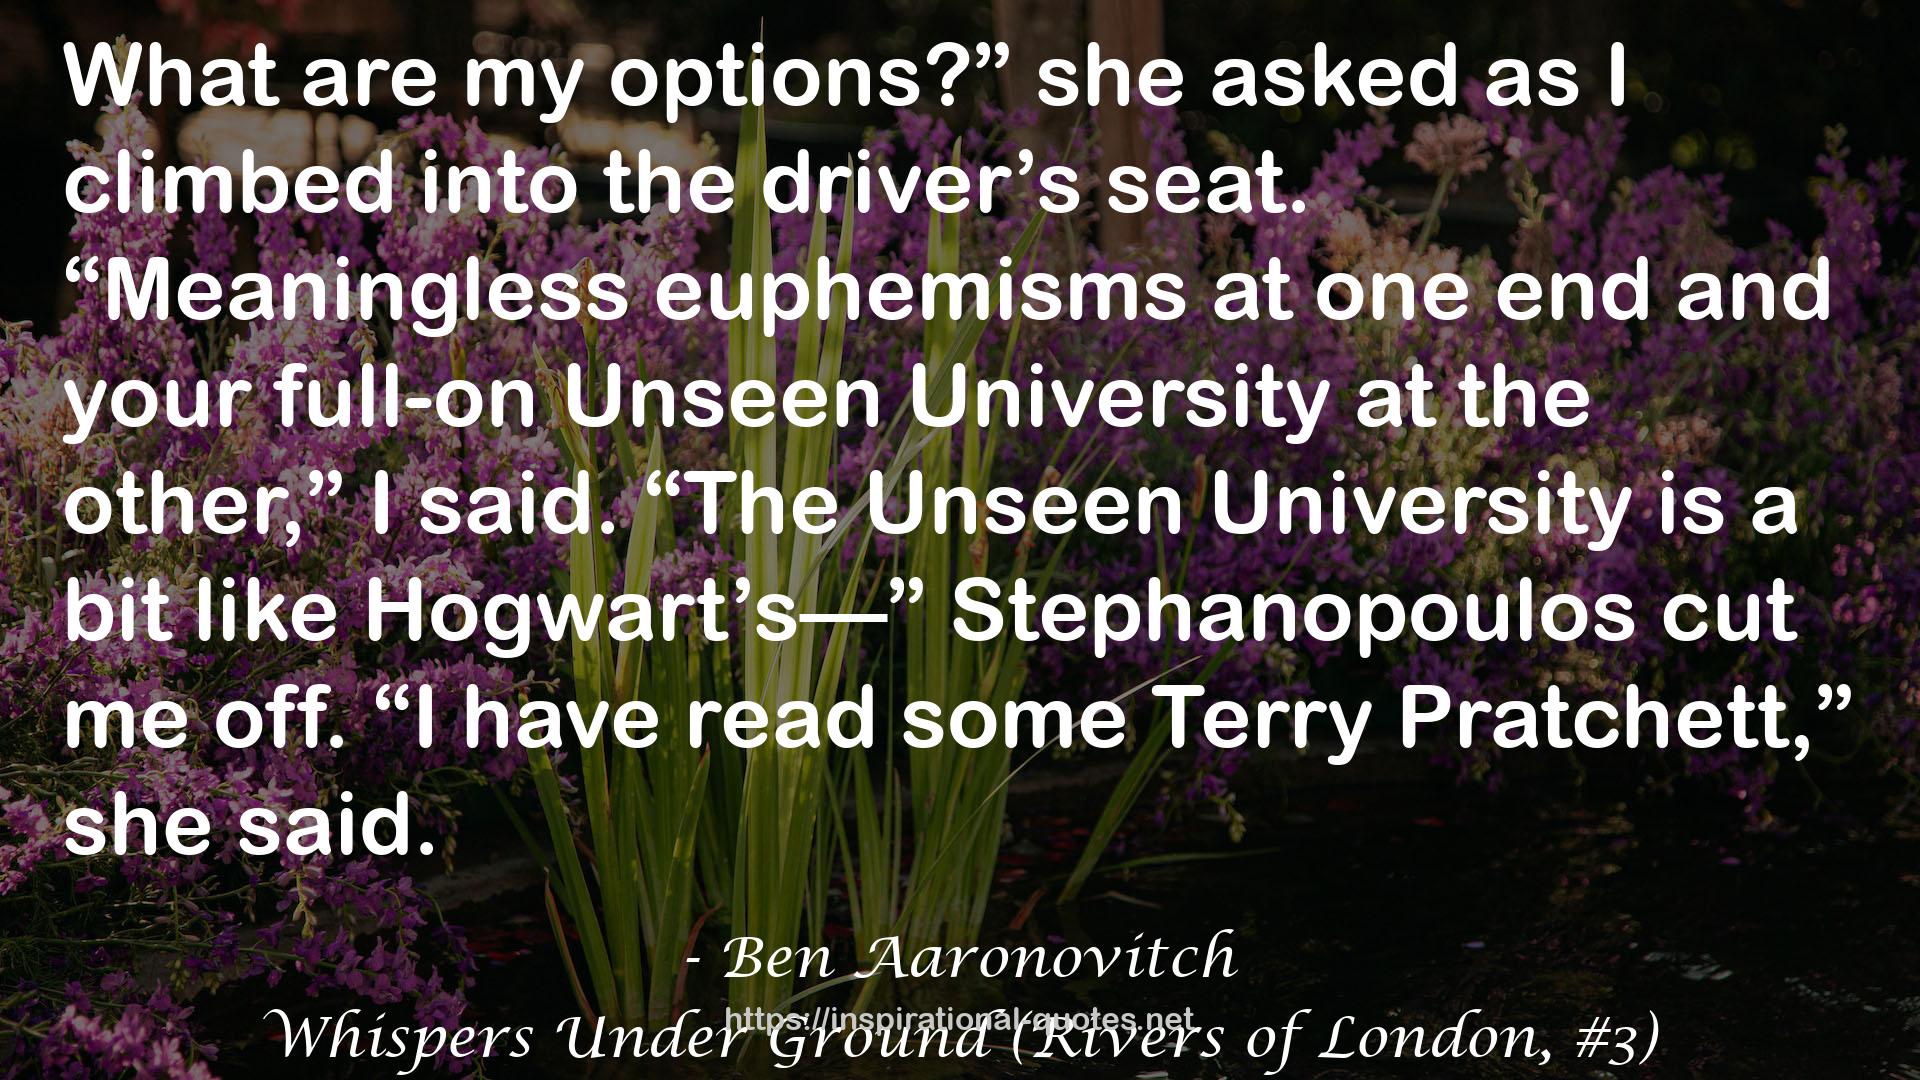 Whispers Under Ground (Rivers of London, #3) QUOTES